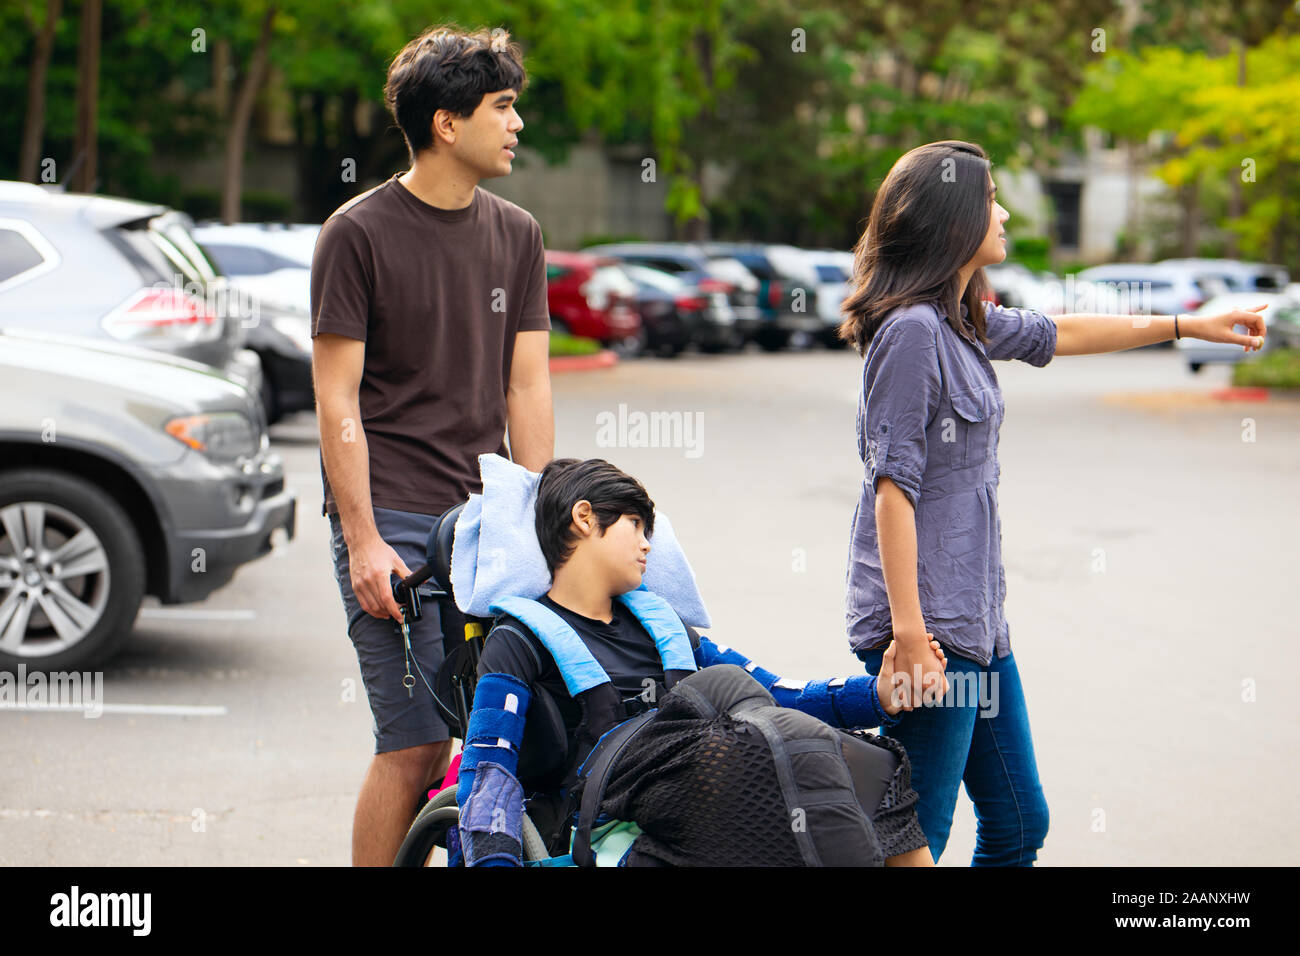 Older brother and sister pushing disabled little boy in wheelchair across parking lot Stock Photo